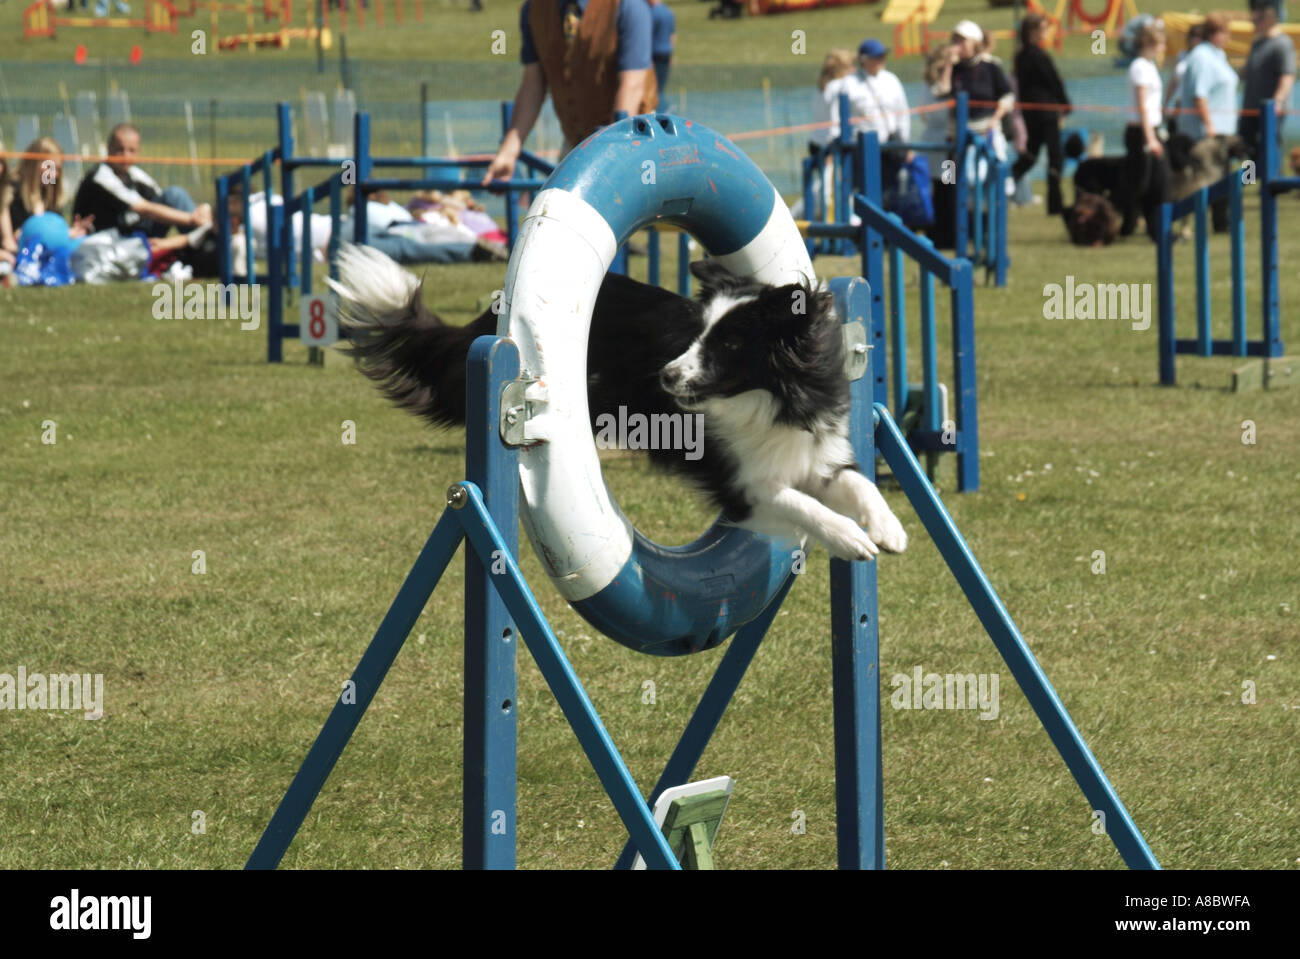 England dog show event border collie working dog jumping through hoop in arena event Stock Photo